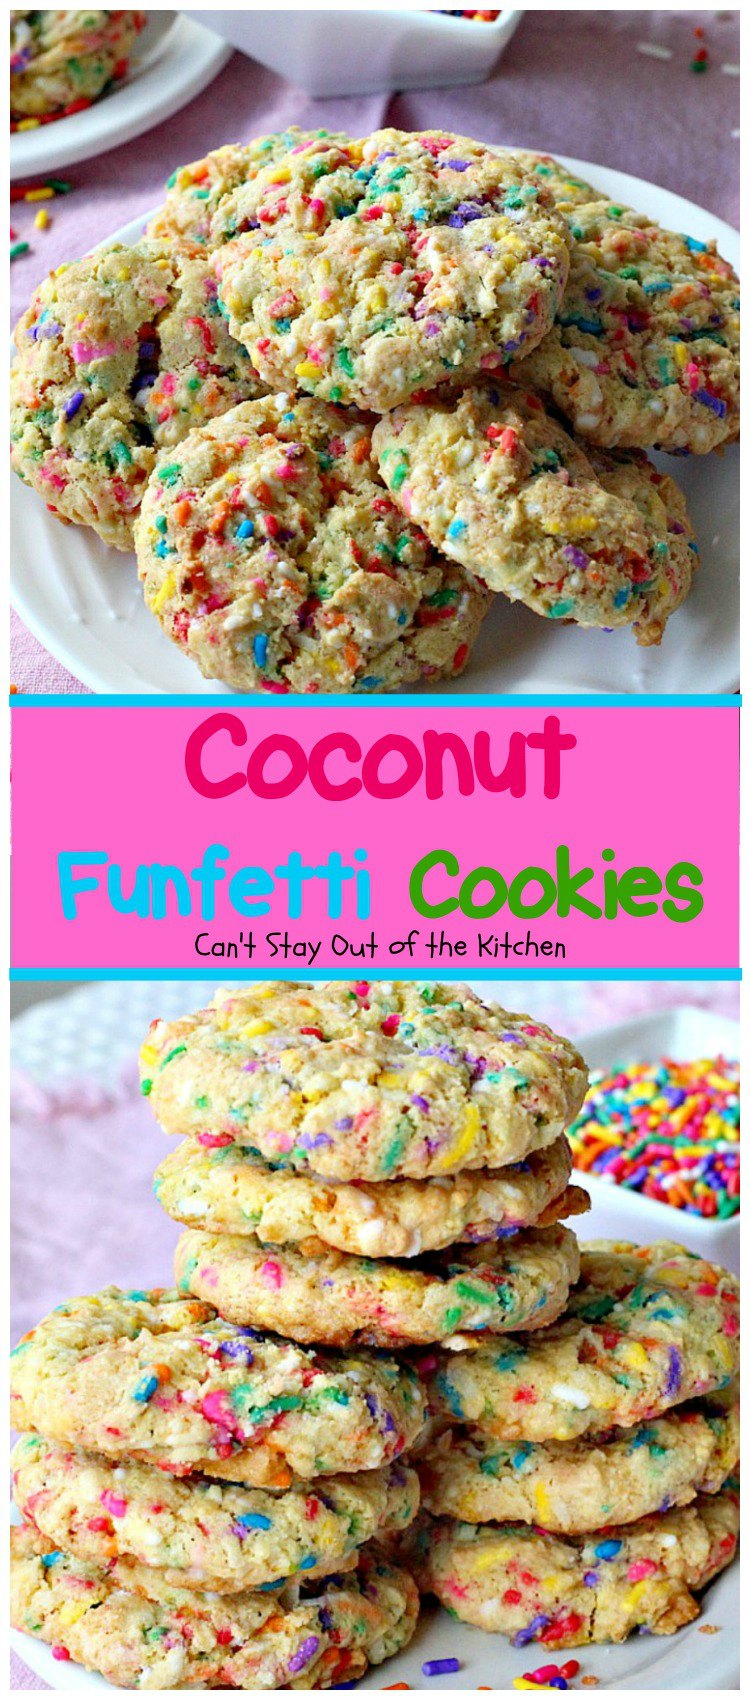 Coconut Funfetti Cookies | Can't Stay Out of the Kitchen